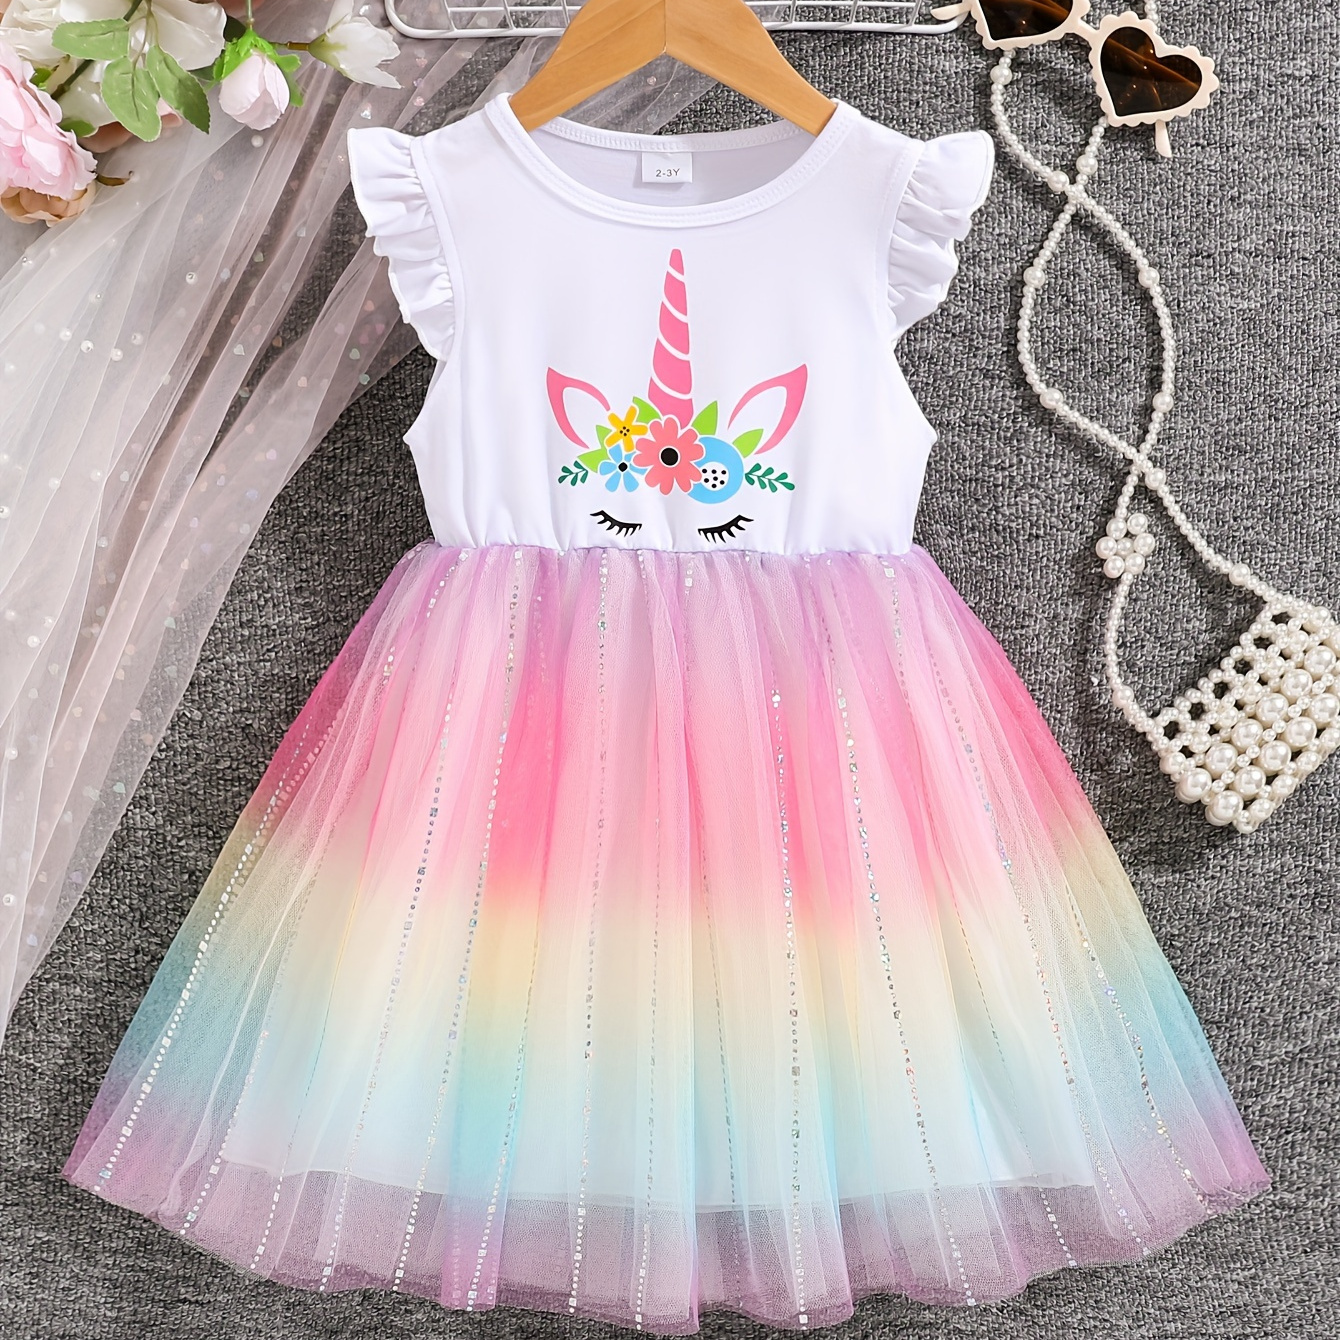 

Unicorn Horns Pattern Frill Sleeve Tutu Dress For Girls Comfy Casual Princess Dresses, Holiday Summer Clothing Gift